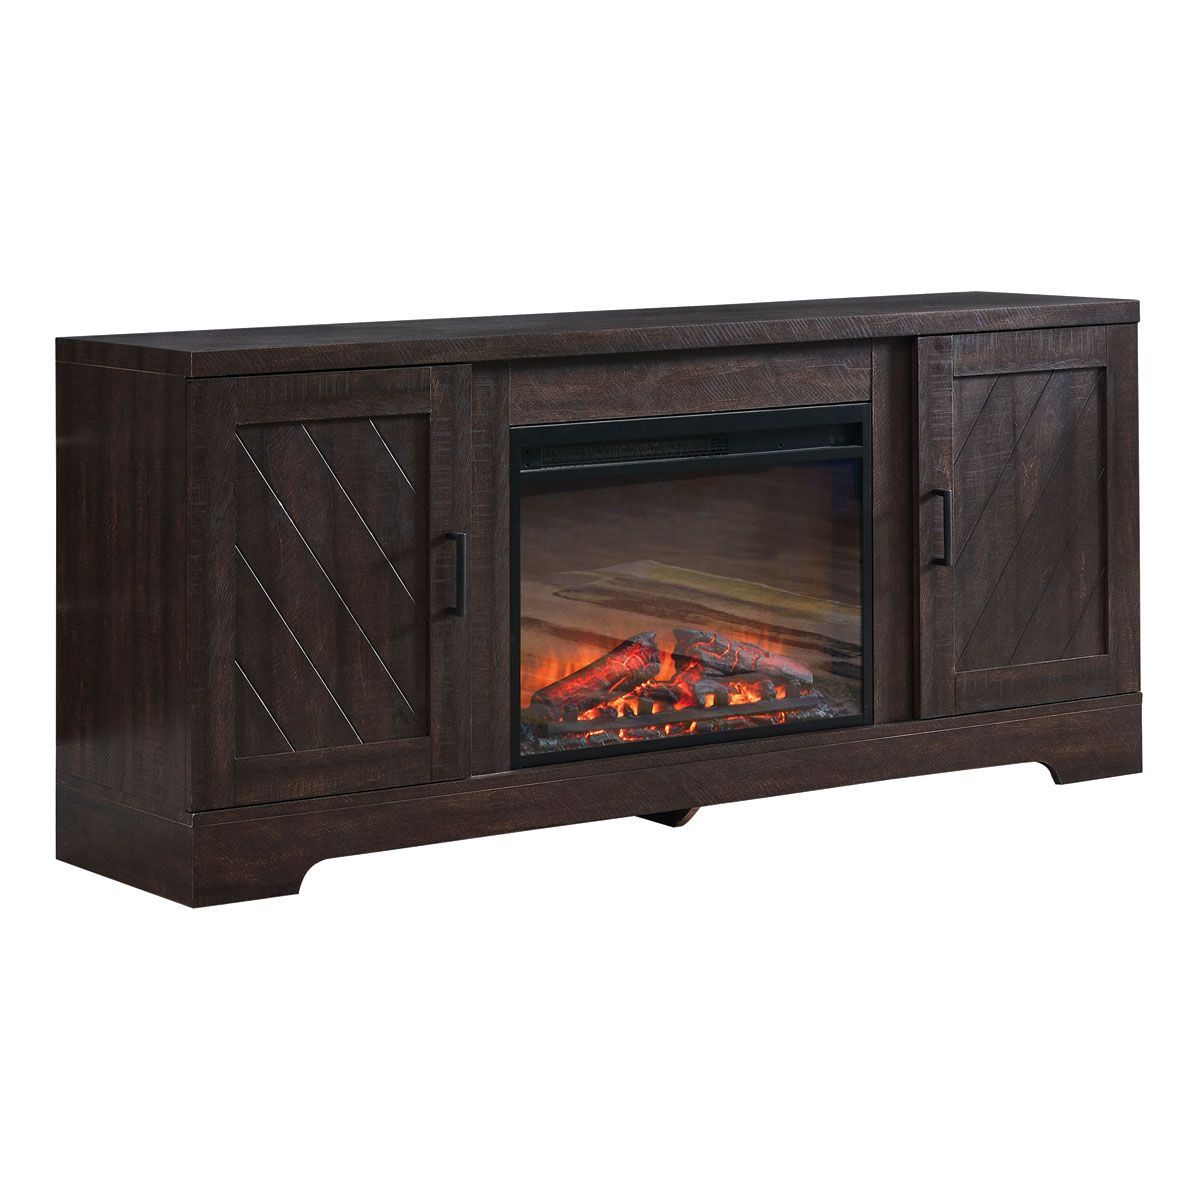 Picture of BARON FIREPLACE TV CONSOLE